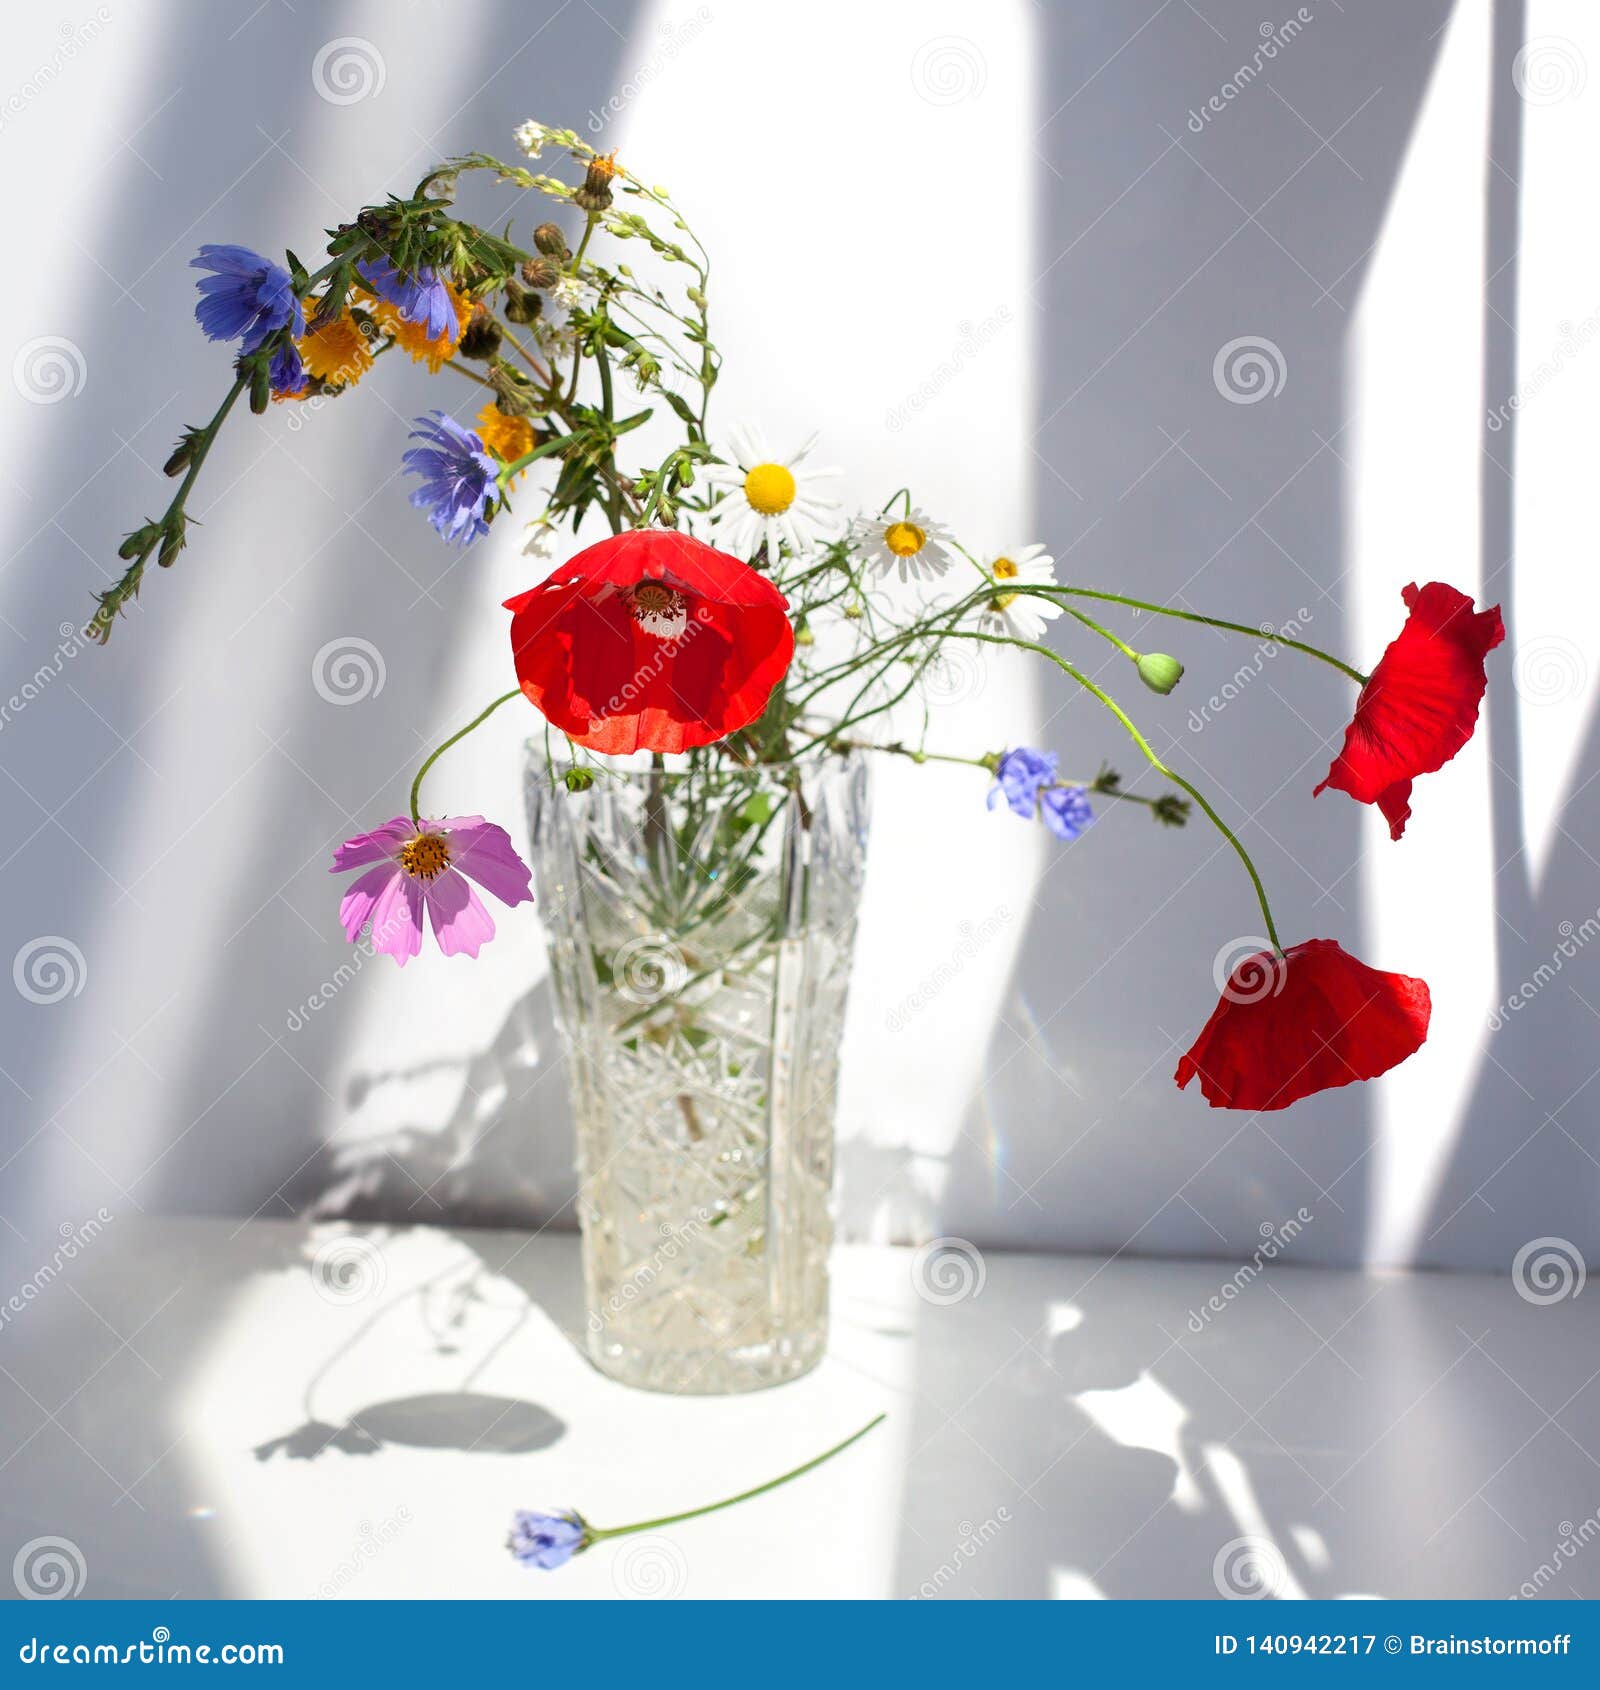 Bouquet of three red poppy flowers and different wildflowers in crystal vase with water on white table with contrast sun light and shadows close up